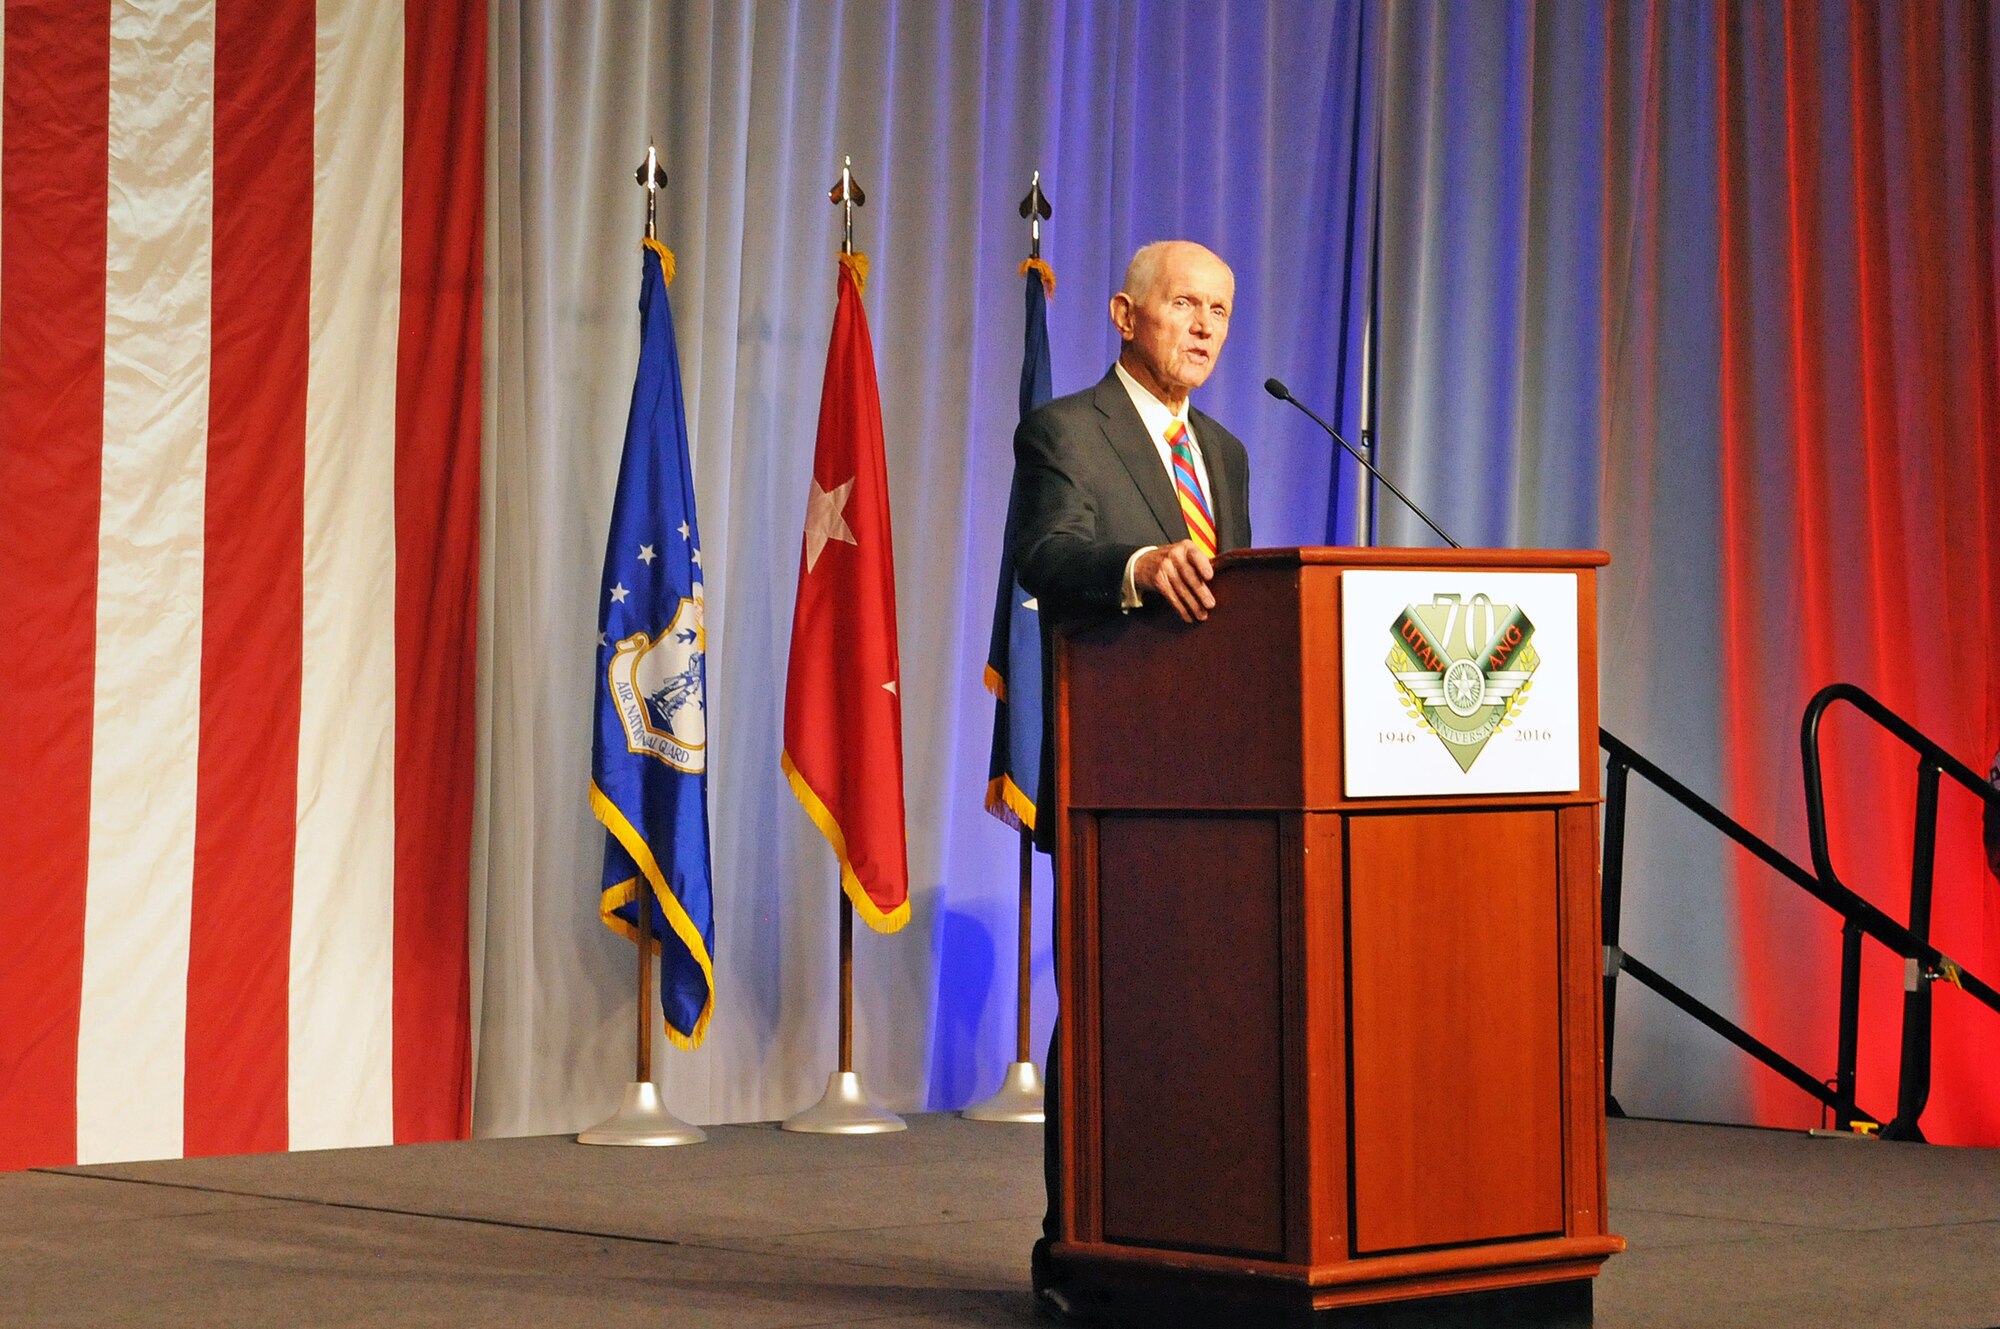 Lt. Col. (Ret.) Jay Hess, prisoner of war and Hanoi Hilton survivor, addresses a group of more than 450 military and civilian guests at the Utah Air National Guard 70th Anniversary Gala on Nov. 4, 2016. The event, hosted by the Utah Air Force Association, was held at The Grand America Hotel in Salt Lake City. (U.S. Air National Guard photo by Staff Sgt. Annie Edwards)